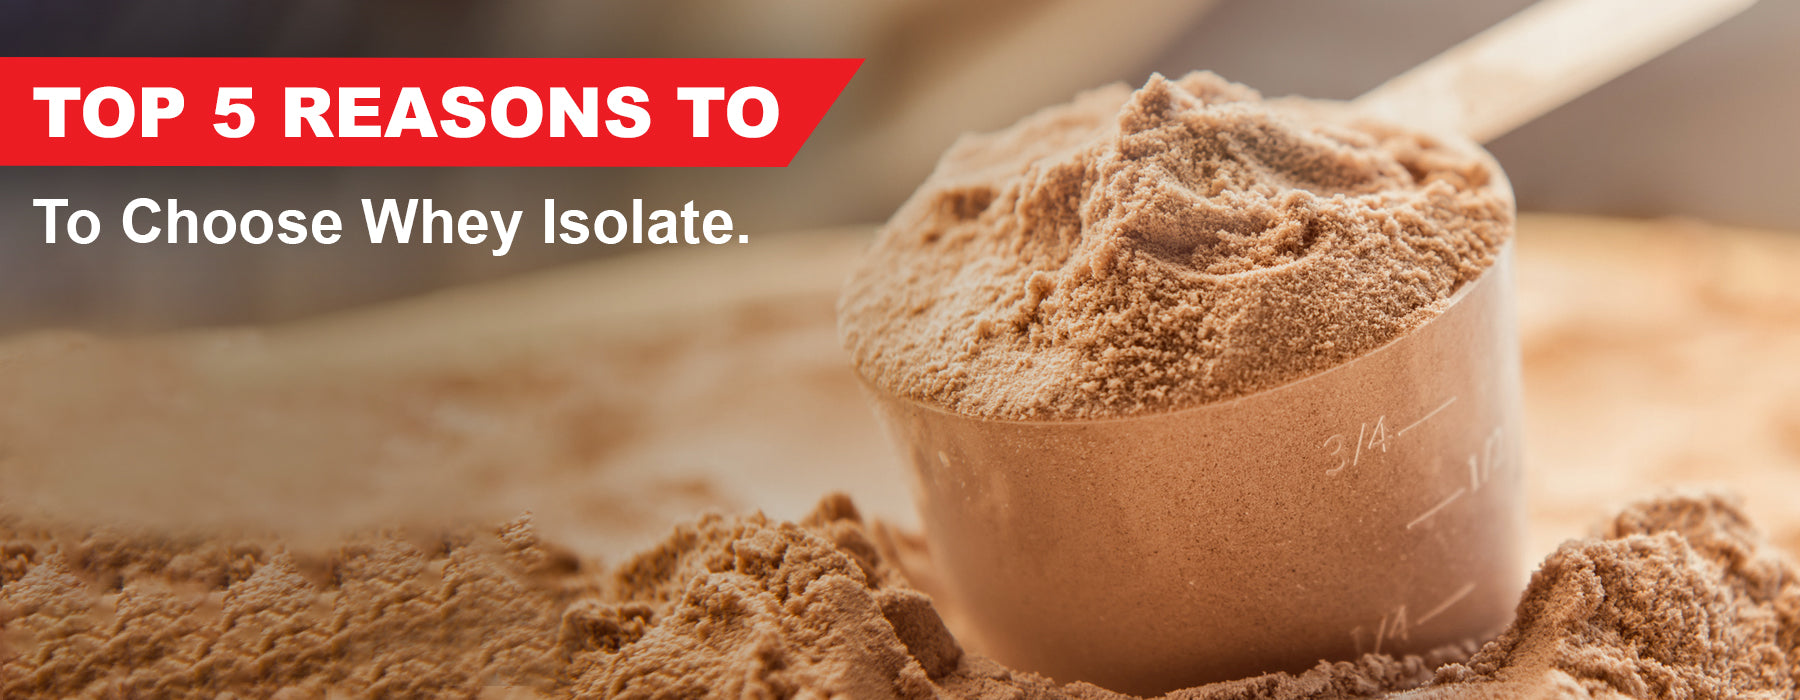 Top 5 reasons to choose Whey protein Isolate